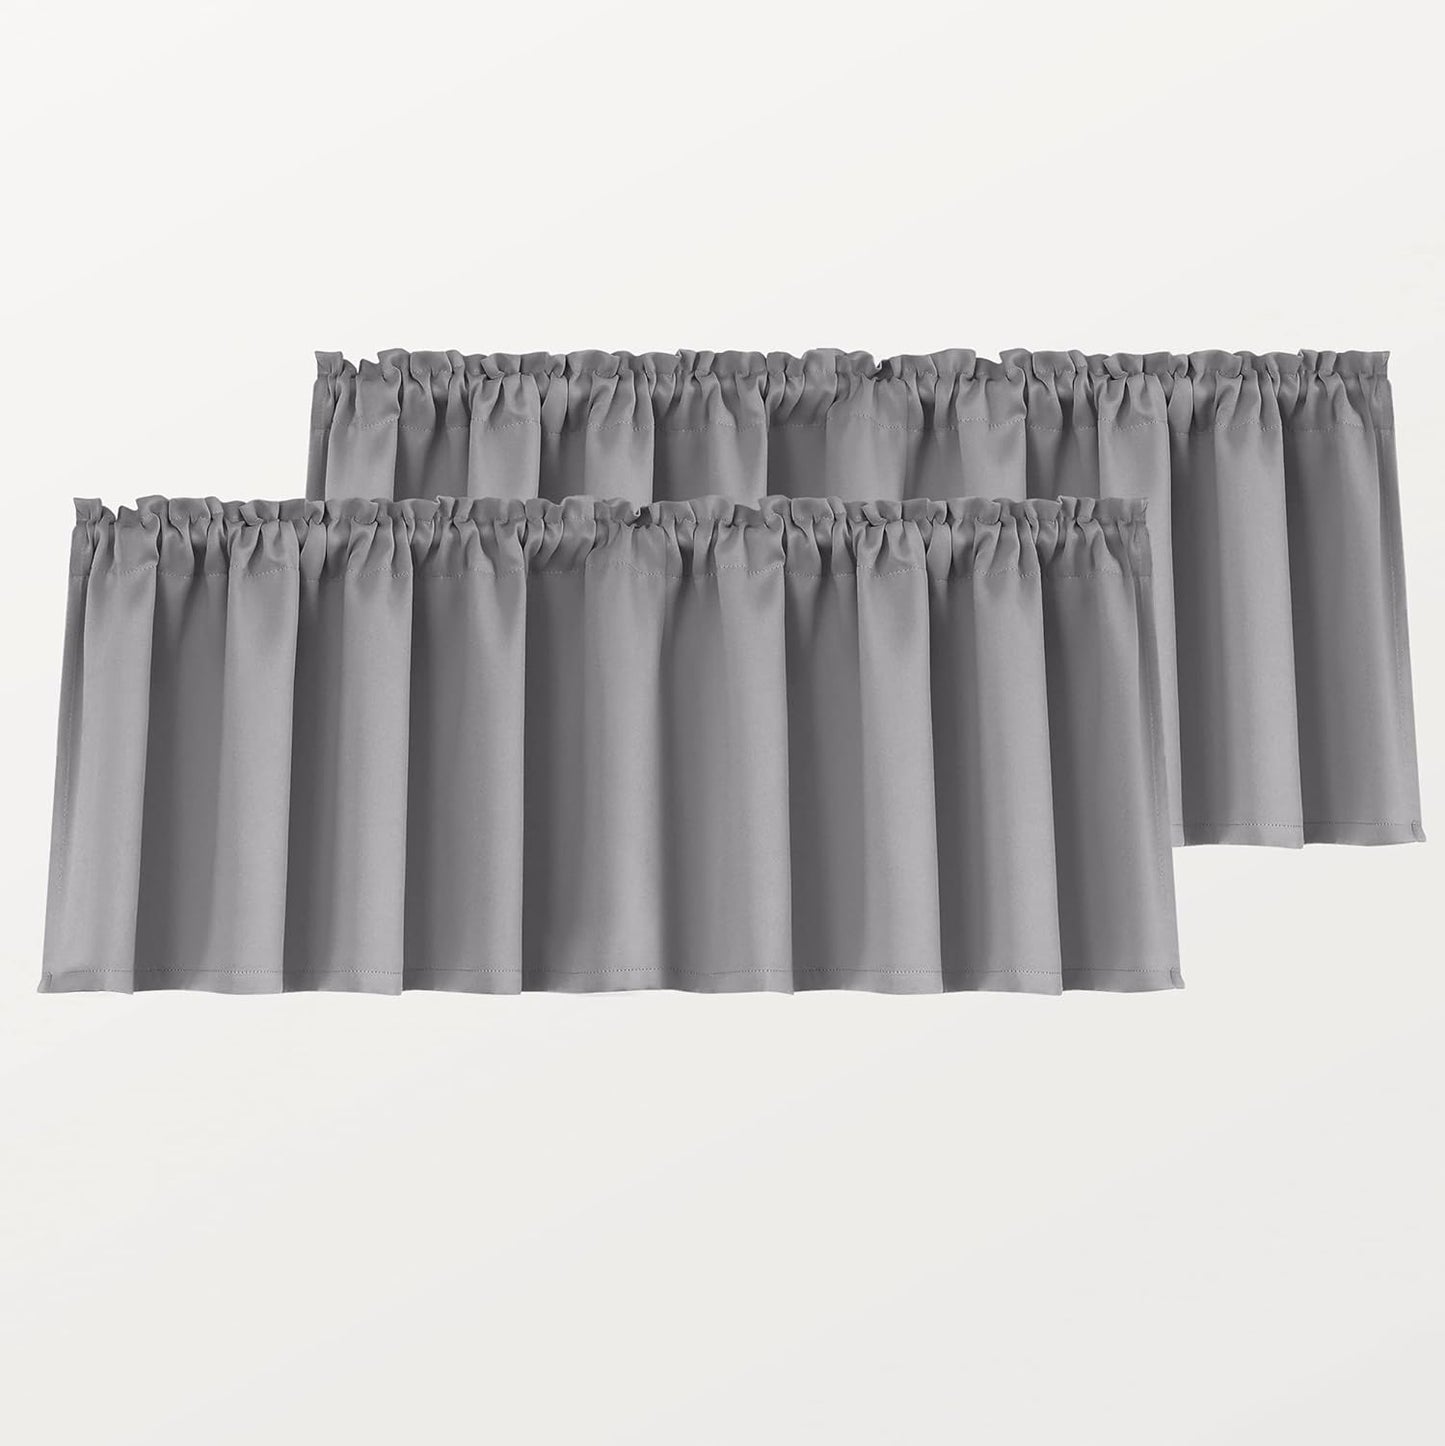 Mrs.Naturall Beige Valance Curtains for Windows 36X16 Inch Length  MRS.NATURALL TEXTILE Grey 36X16 